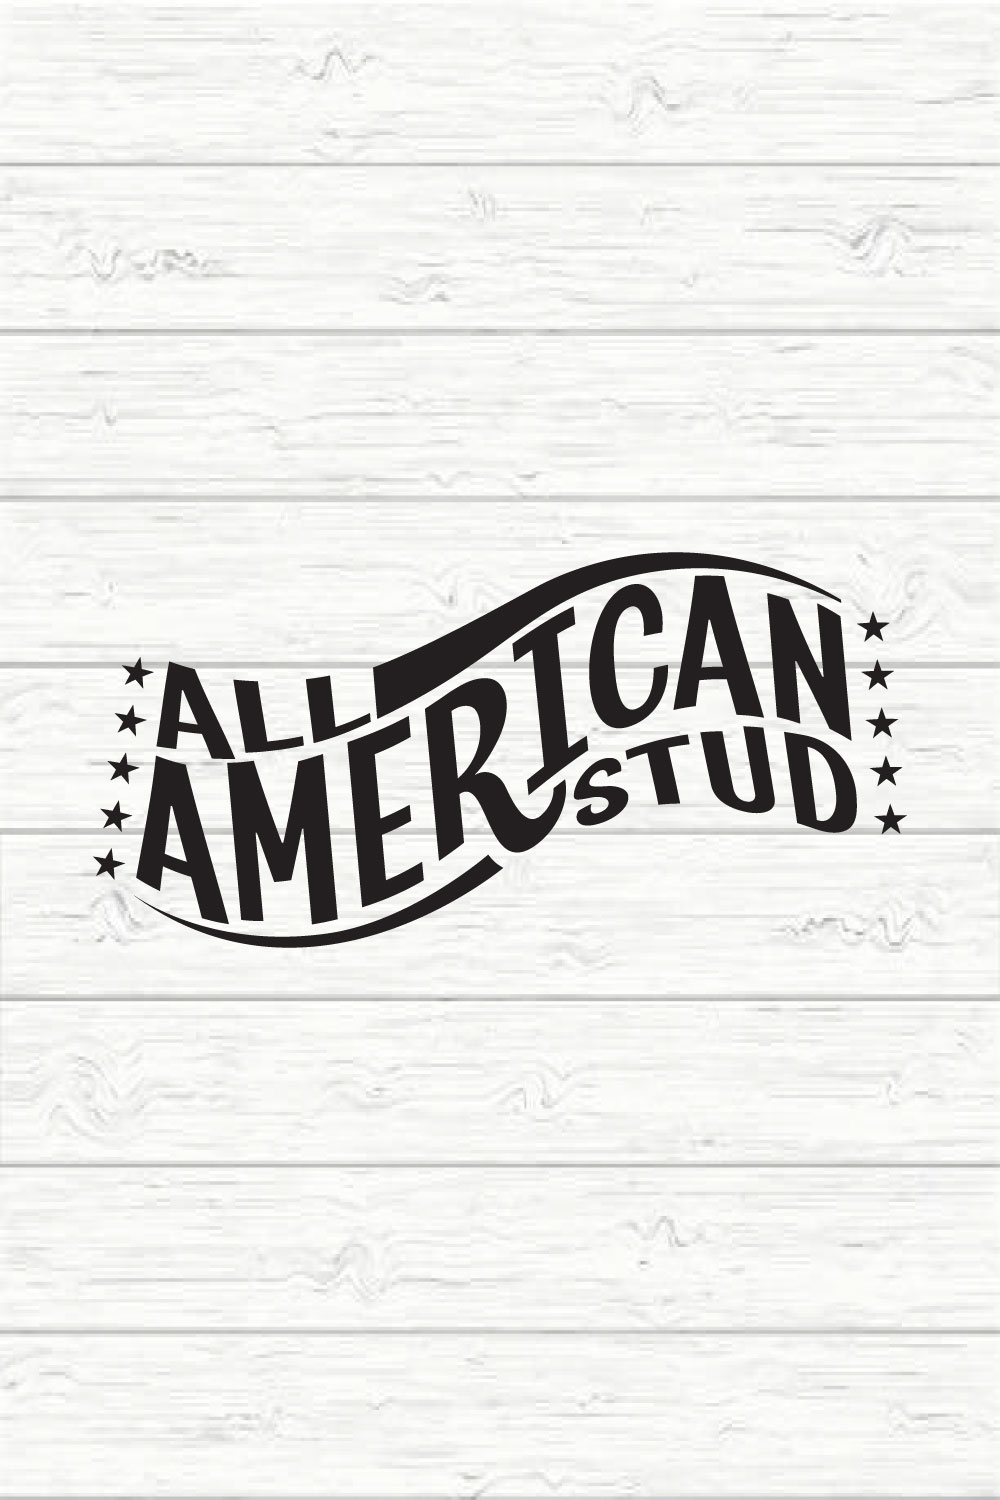 All American Stud pinterest preview image.